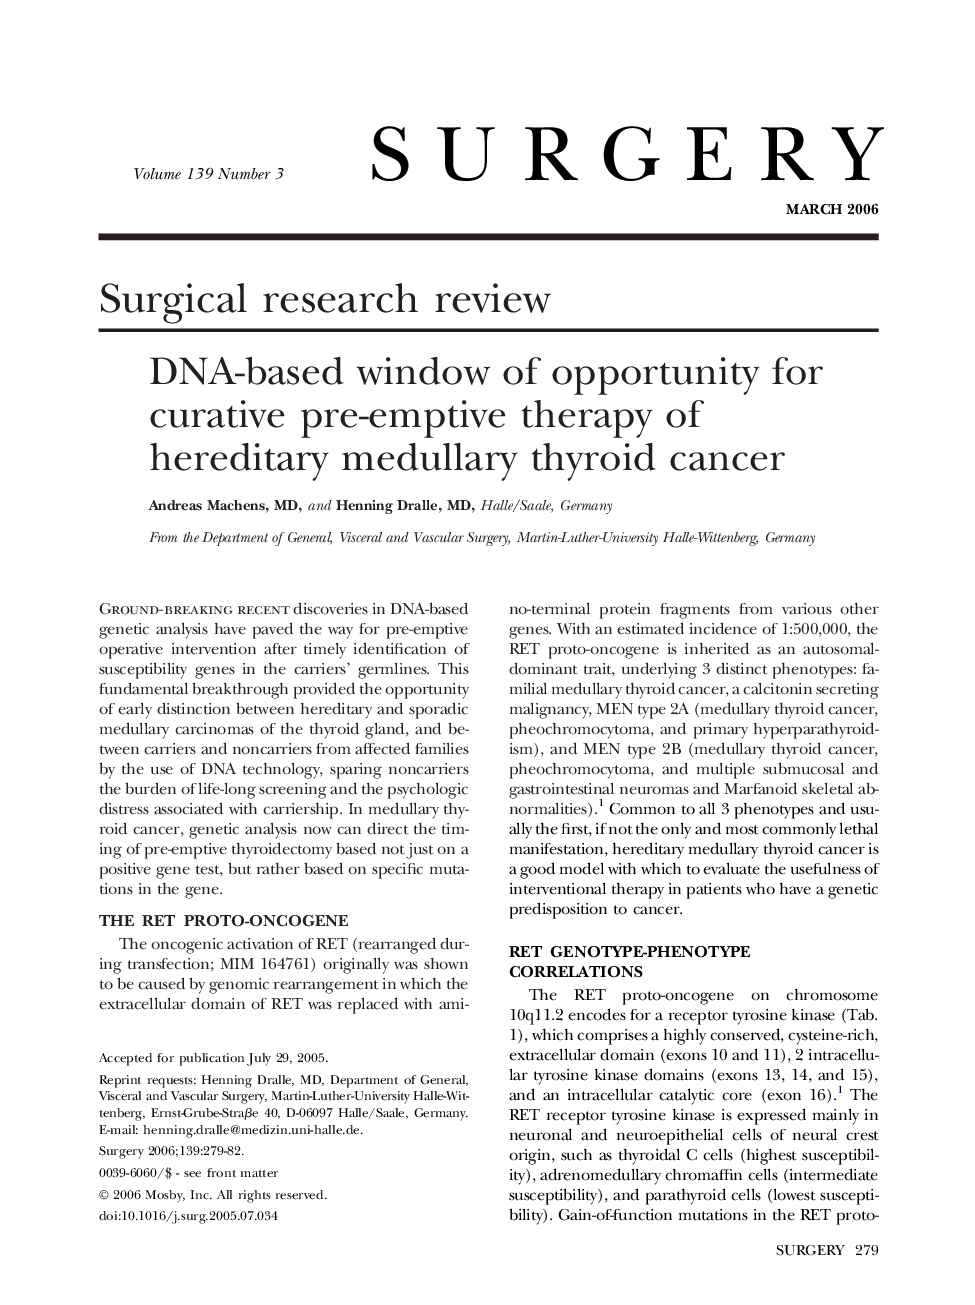 DNA-based window of opportunity for curative pre-emptive therapy of hereditary medullary thyroid cancer